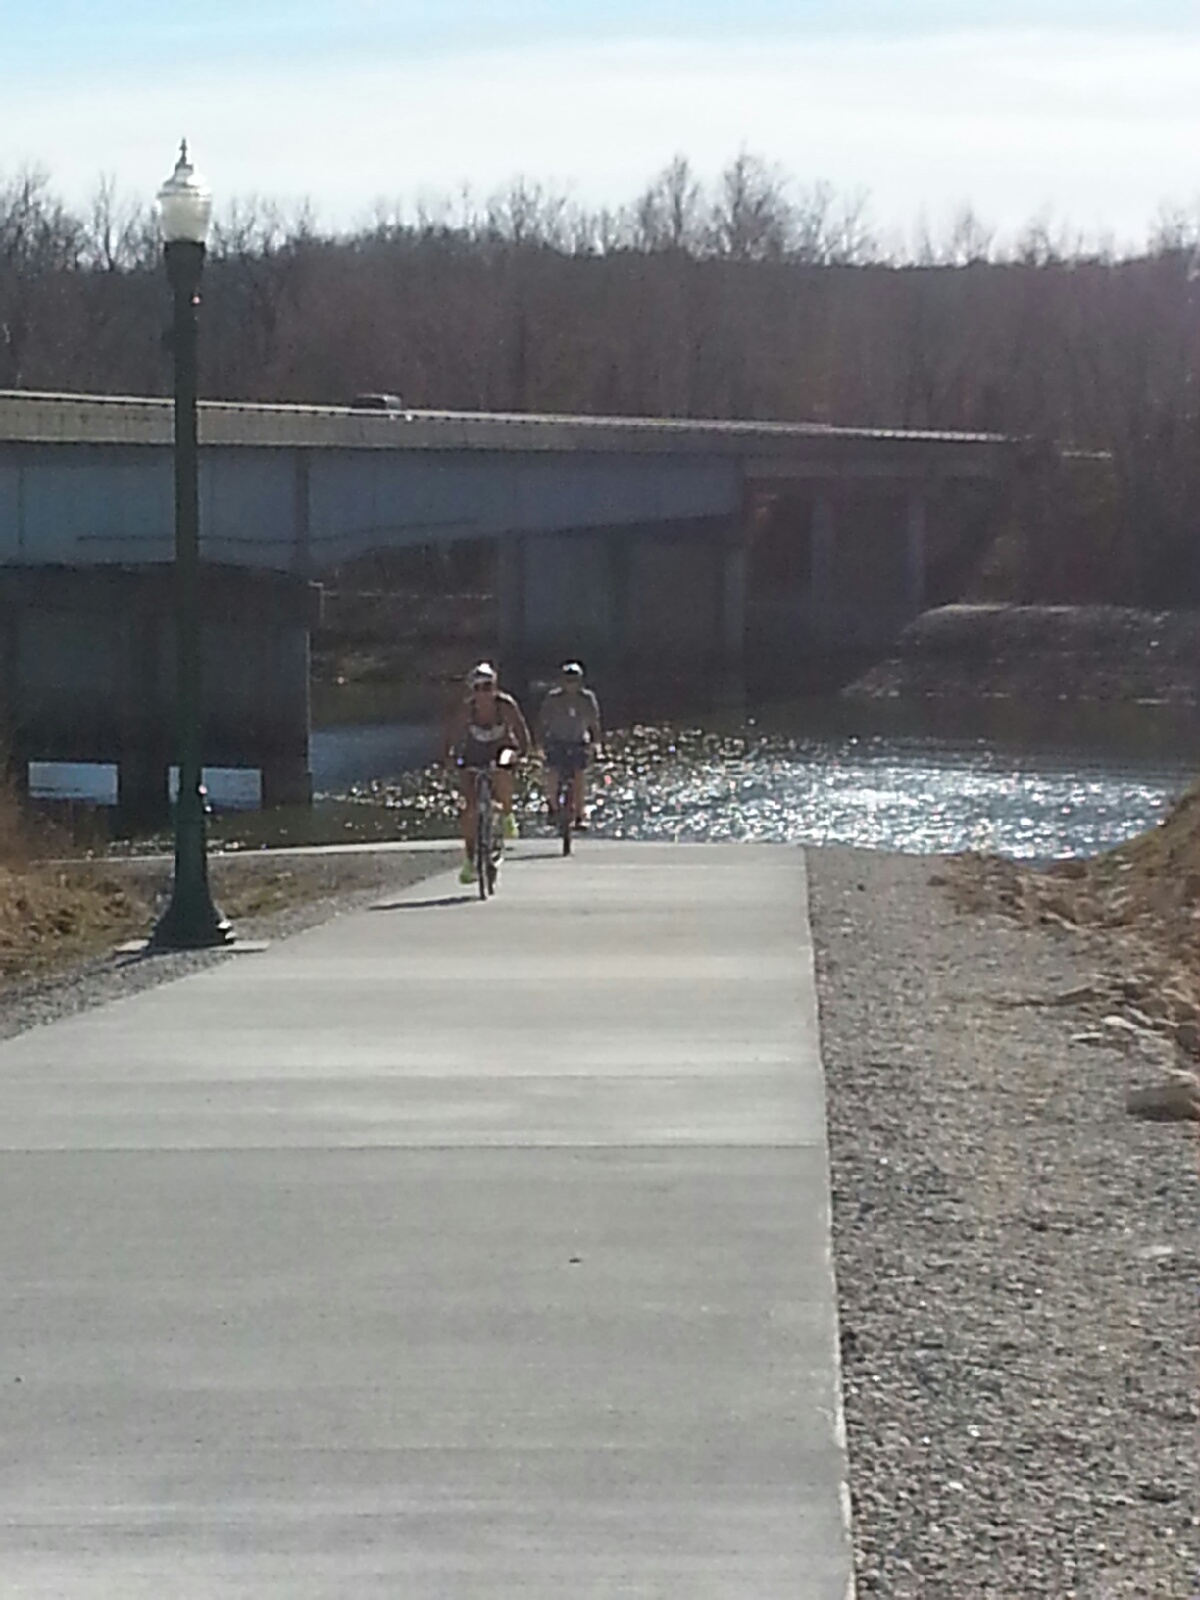 two cyclists on a concrete trail